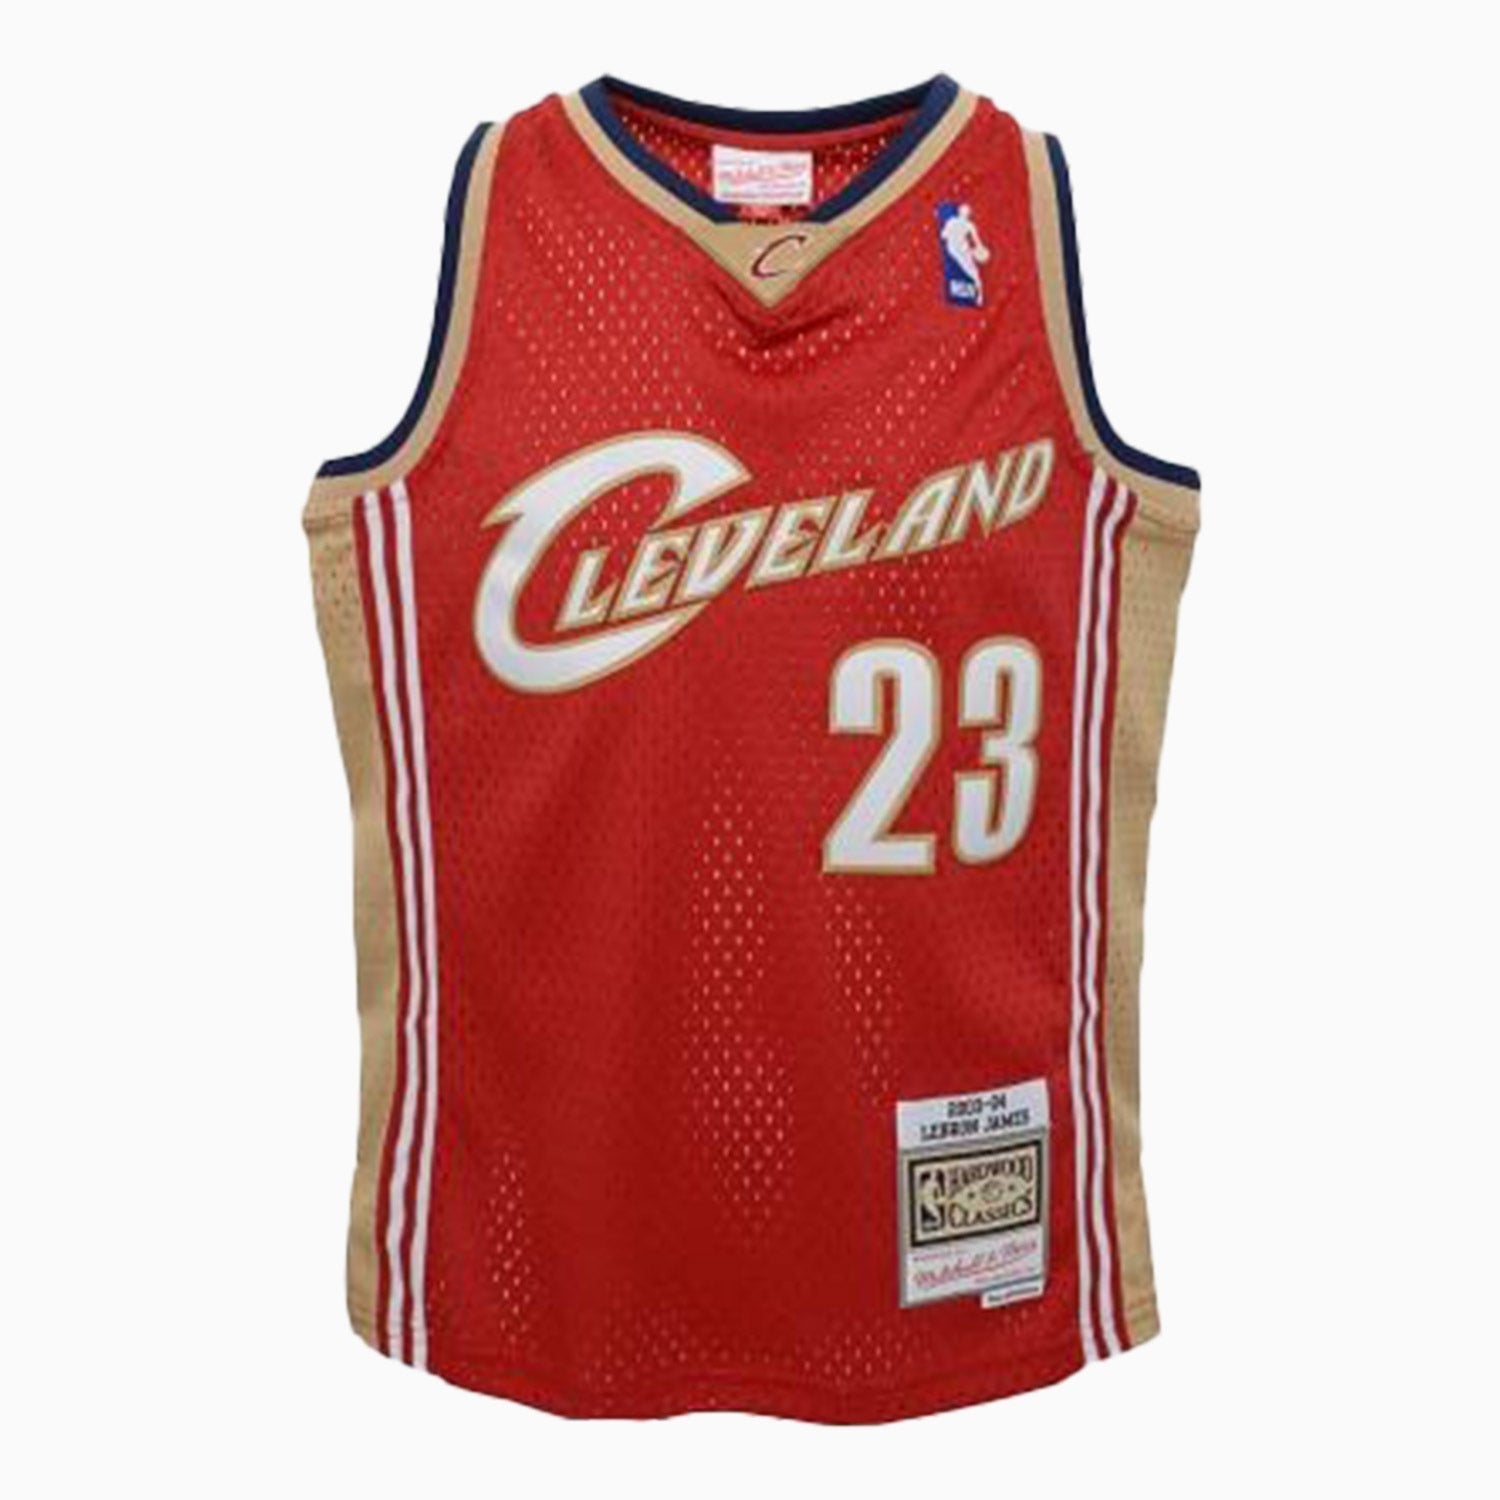 mitchell-and-ness-swingman-lebron-james-cleveland-cavaliers-2003-04-nba-jersey-youth-9n2b7brd0-cavlj-y03